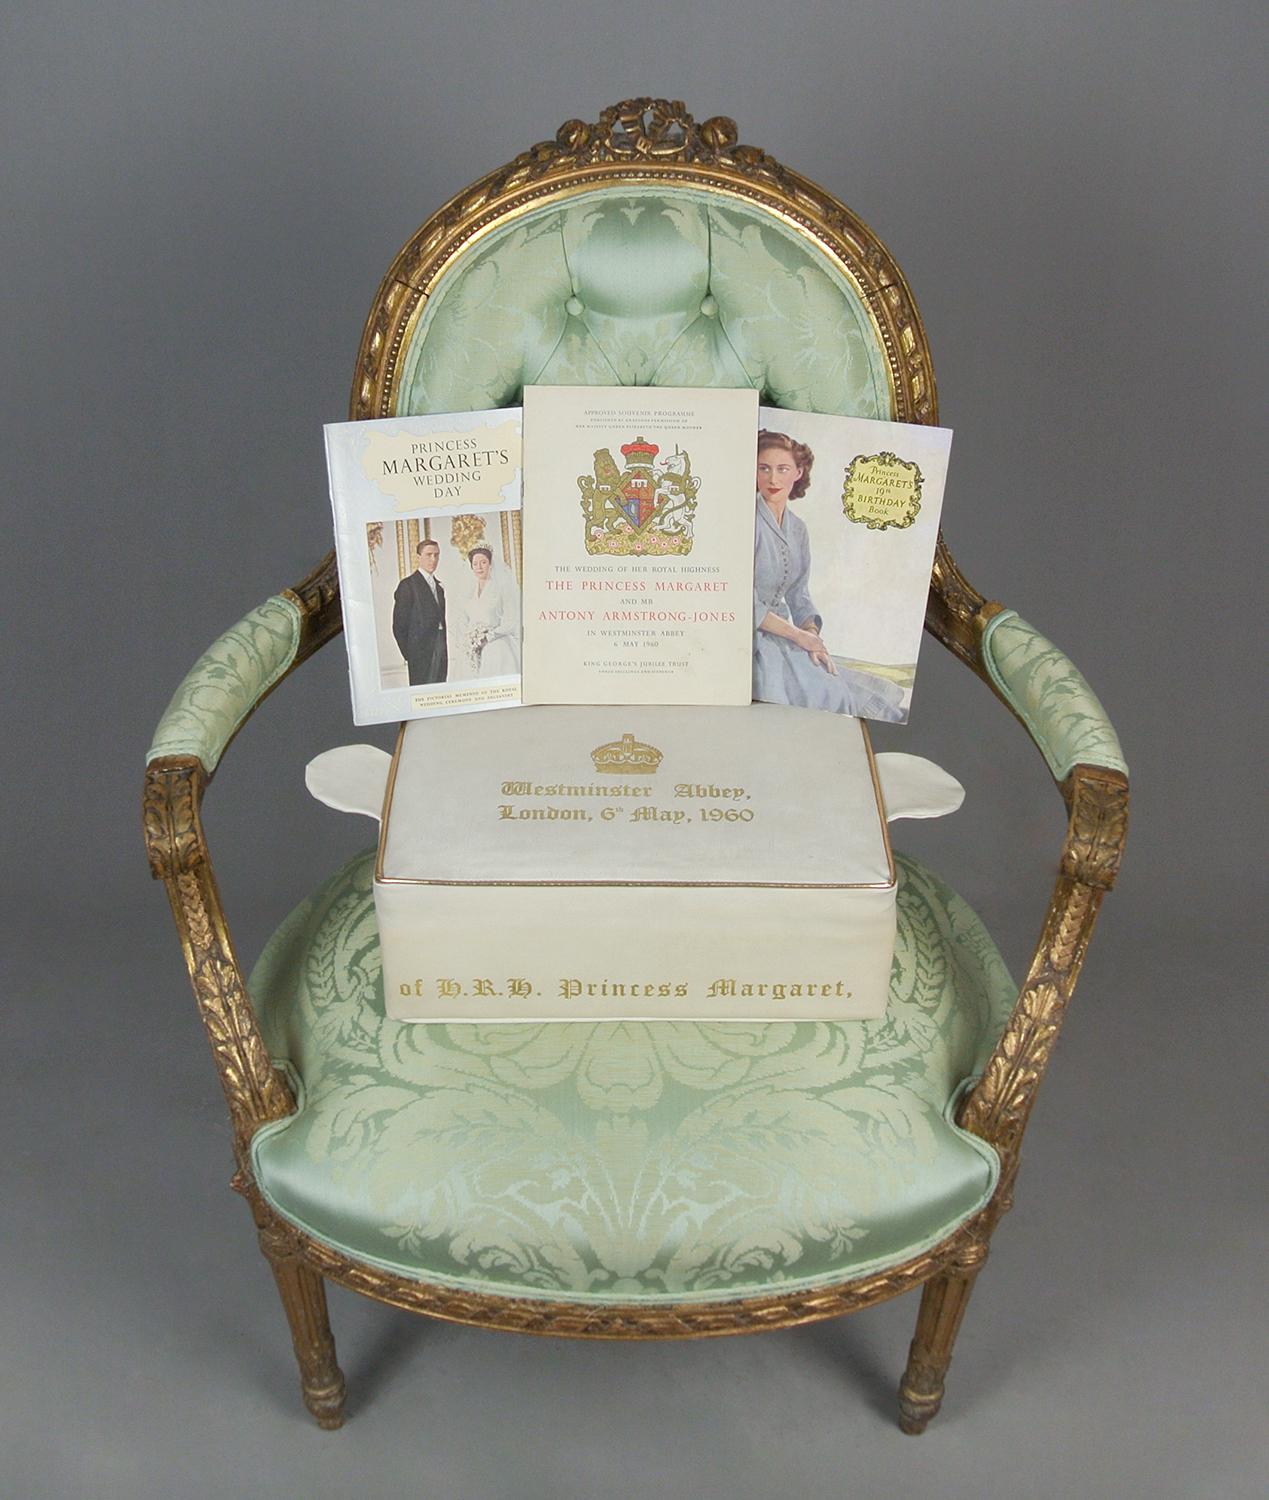 An original item used at the Wedding of Princess Margaret to Antony Armstrong-Jones, this cream leather Hassock (kneeling cushion) is embellished with gold script extending to all four sides ‘To Commemorate The Royal Wedding Of H.R.H Princess